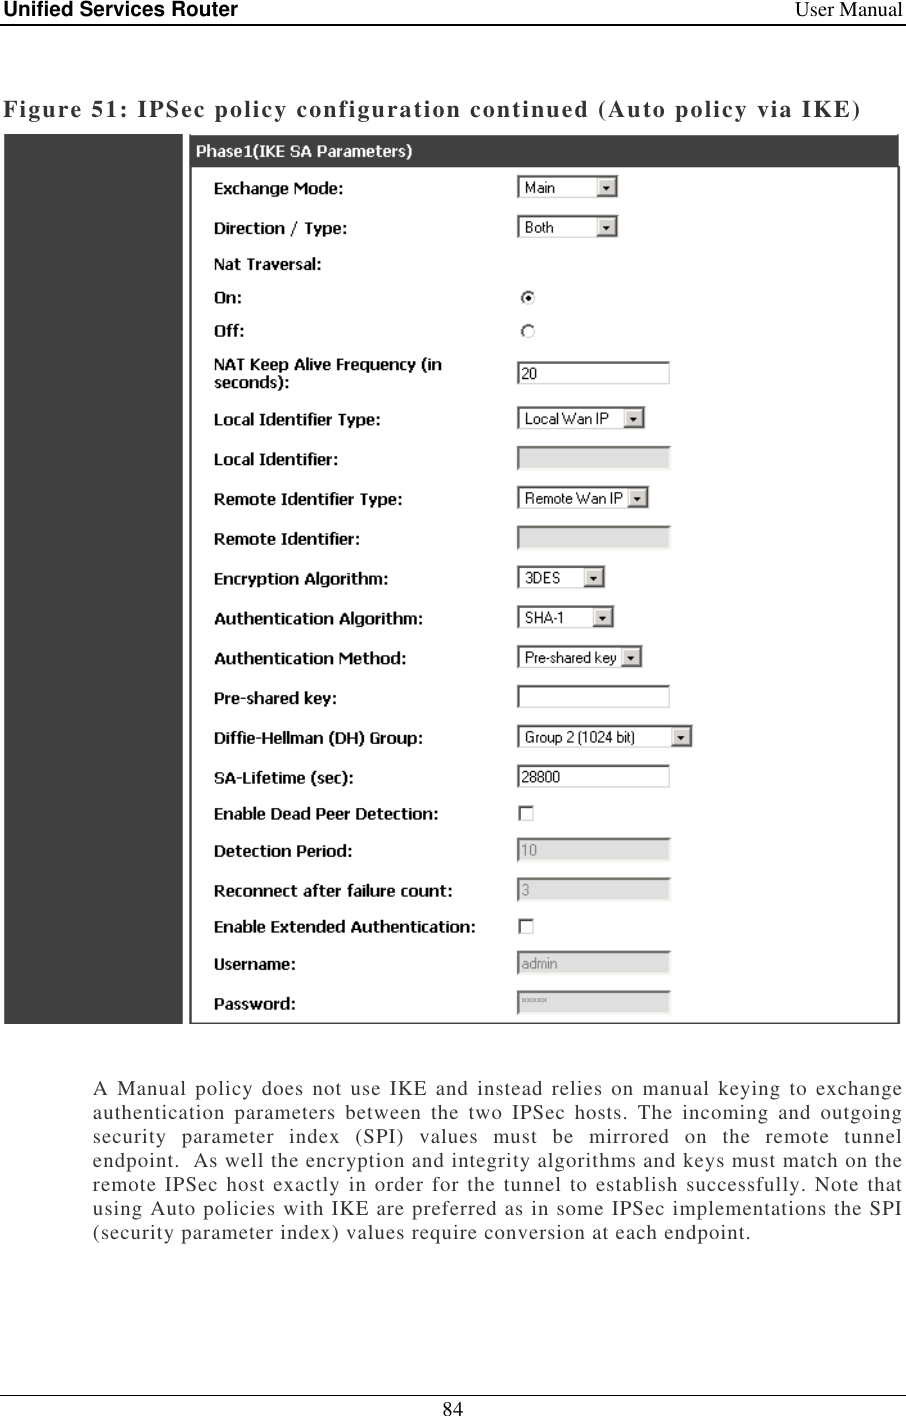 Unified Services Router    User Manual 84   Figure 51: IPSec policy configuration continued (Auto policy via IKE)   A  Manual  policy  does  not  use IKE  and instead relies on  manual  keying  to  exchange authentication  parameters  between  the  two  IPSec  hosts.  The  incoming  and  outgoing security  parameter  index  (SPI)  values  must  be  mirrored  on  the  remote  tunnel endpoint.  As well the encryption and integrity algorithms and keys must match on the remote IPSec host exactly in order for the tunnel to establish successfully. Note that using Auto policies with IKE are preferred as in some IPSec implementations the SPI (security parameter index) values require conversion at each endpoint.    